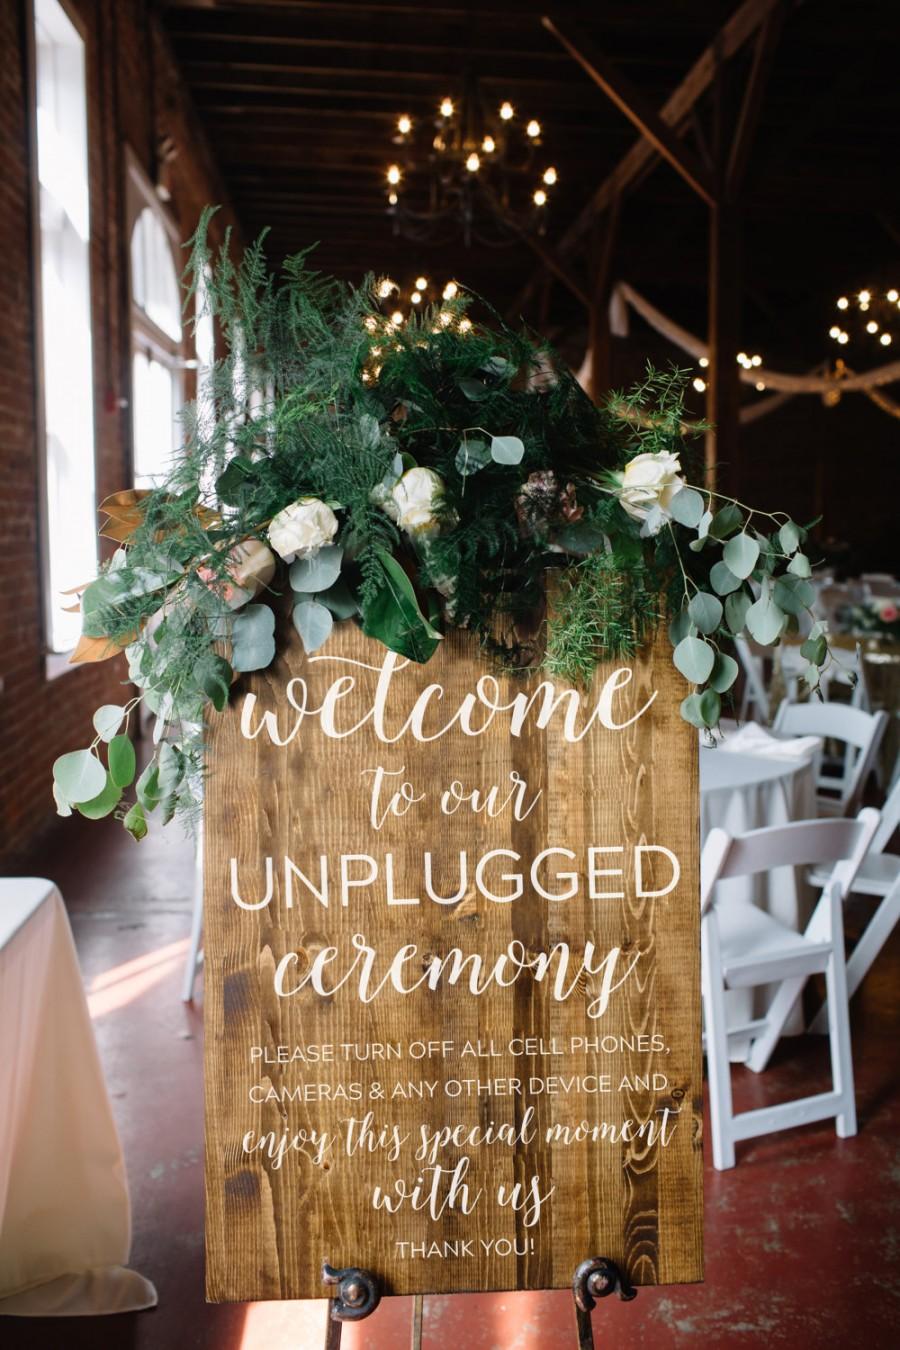 Wedding - Unplugged Wedding Sign, Unplugged Ceremony Sign - Keep Your Wedding Guests Unplugged - Rustic Wooden Wedding Sign - Elizabeth Collection